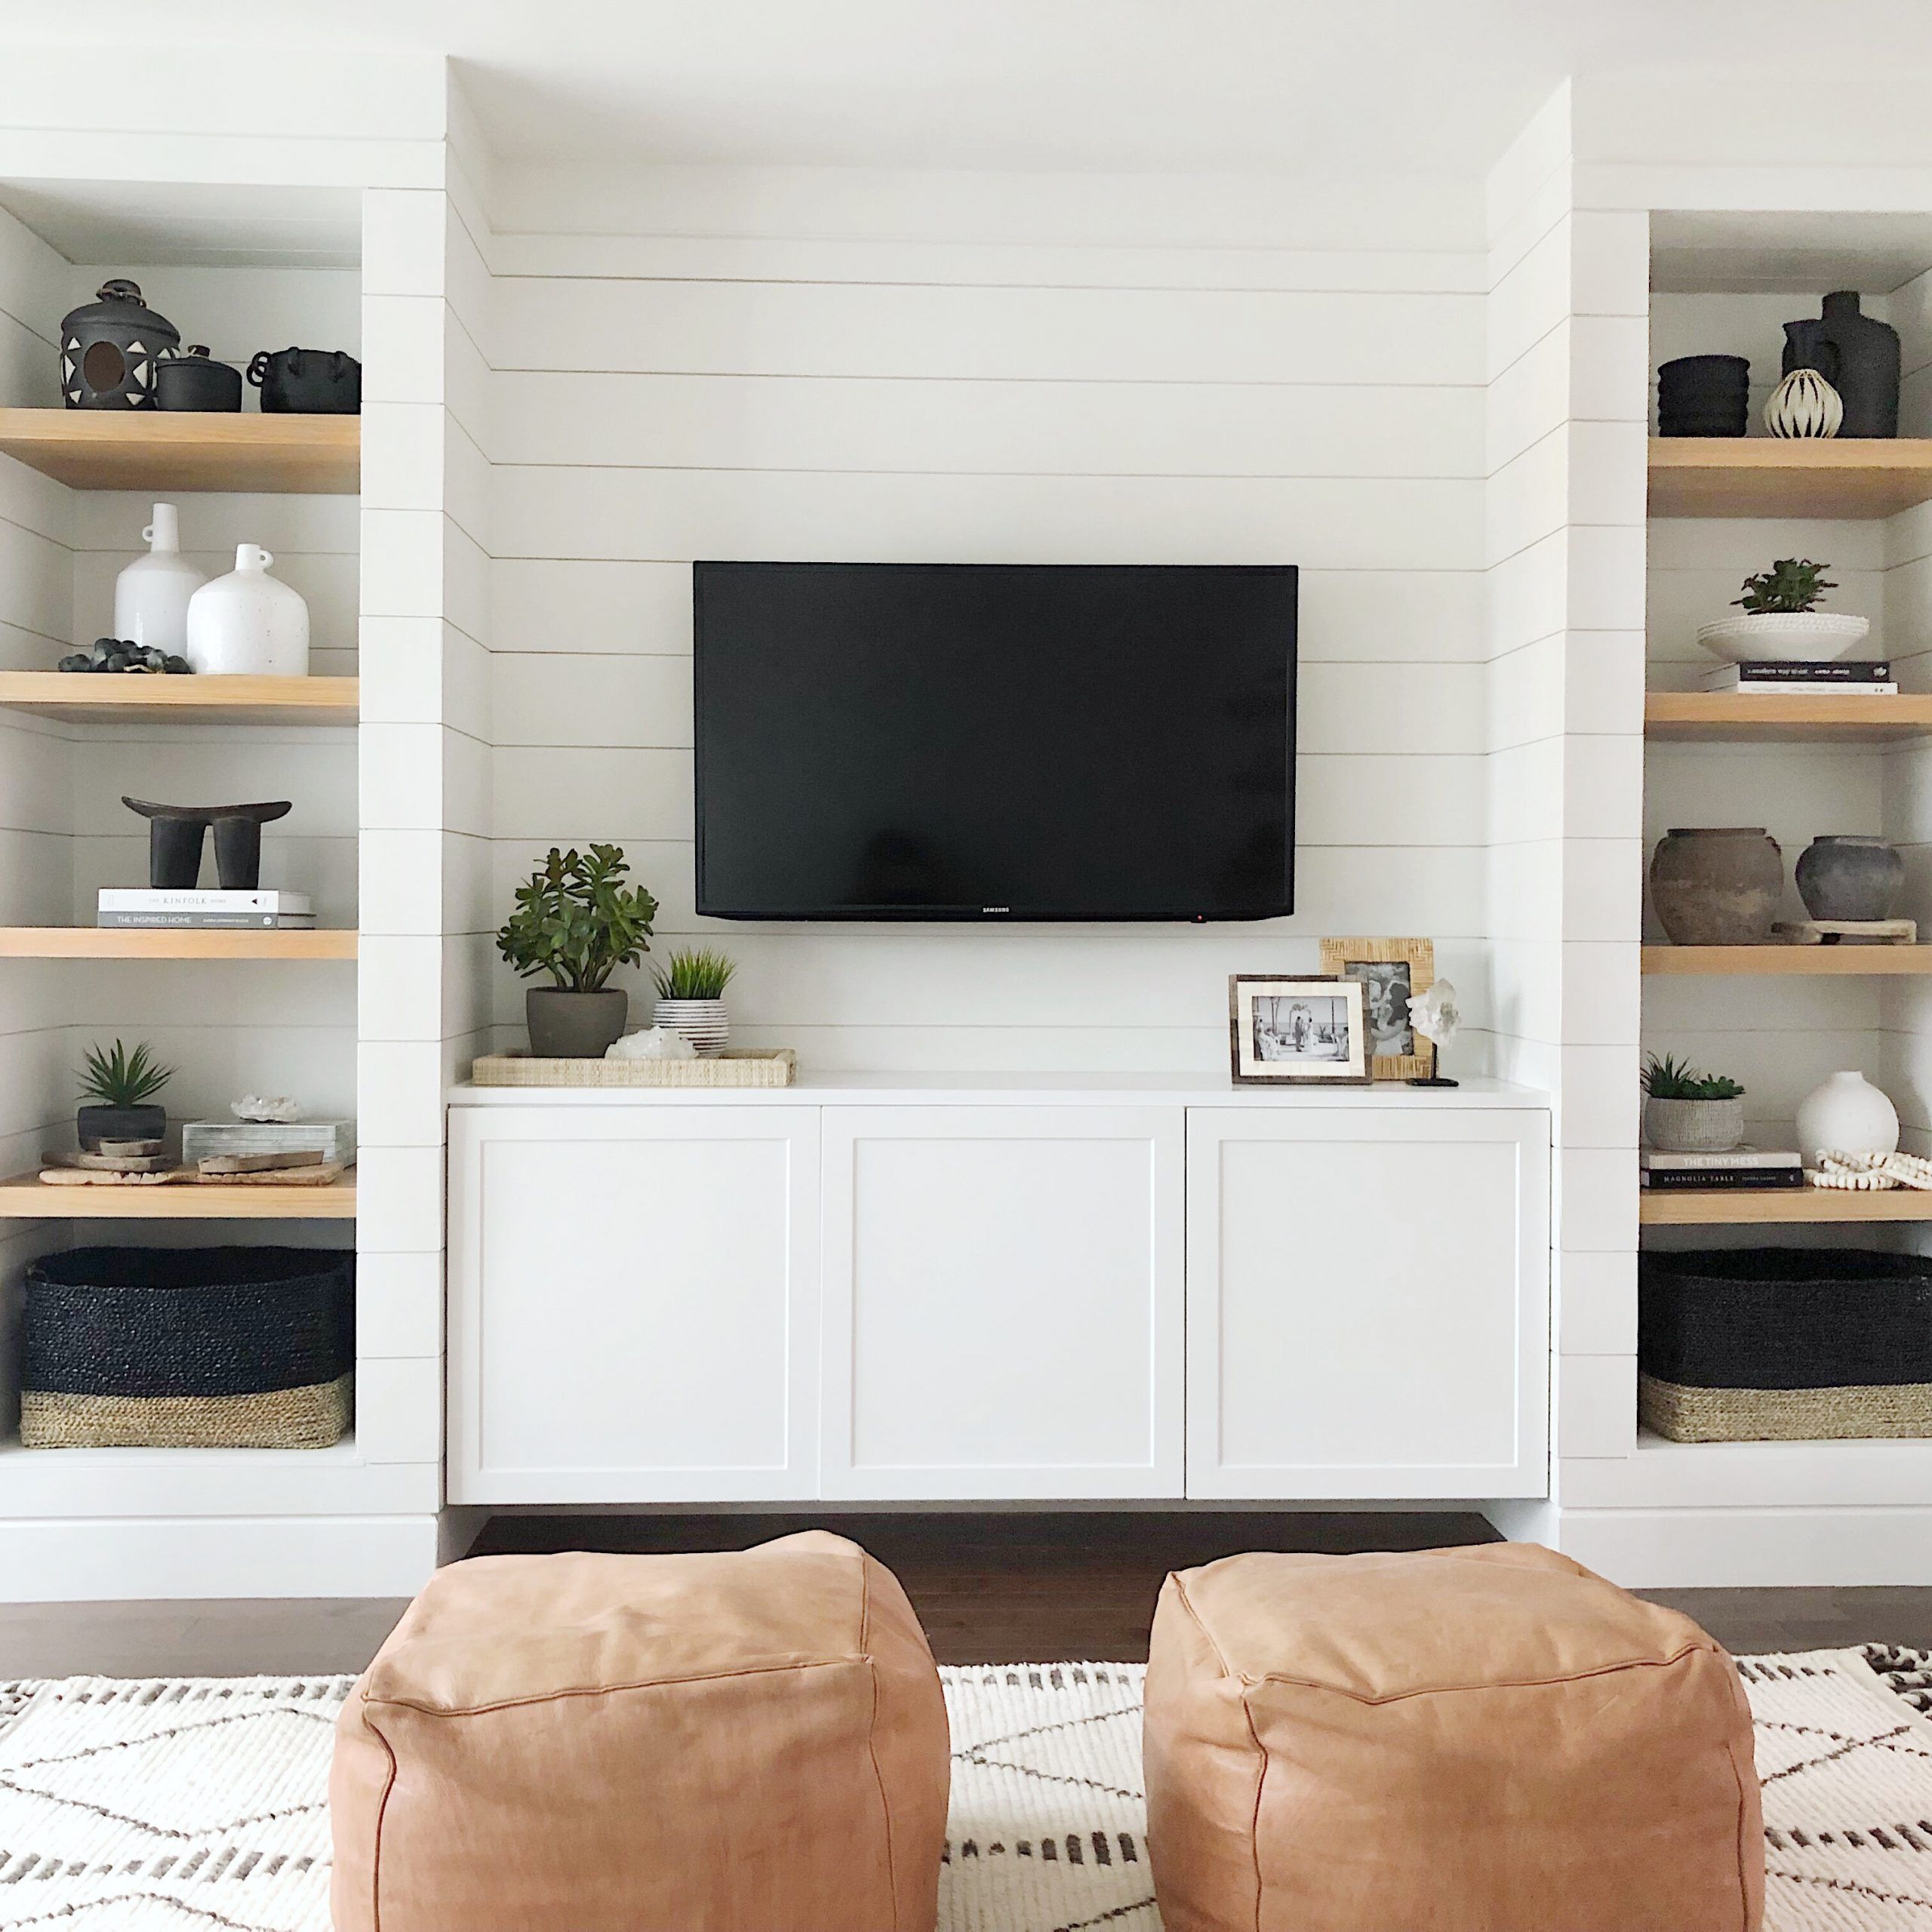 The Best Ikea Besta Hacks You Can Diy Right Now Intended For Ikea Built In Tv Cabinets (View 13 of 15)